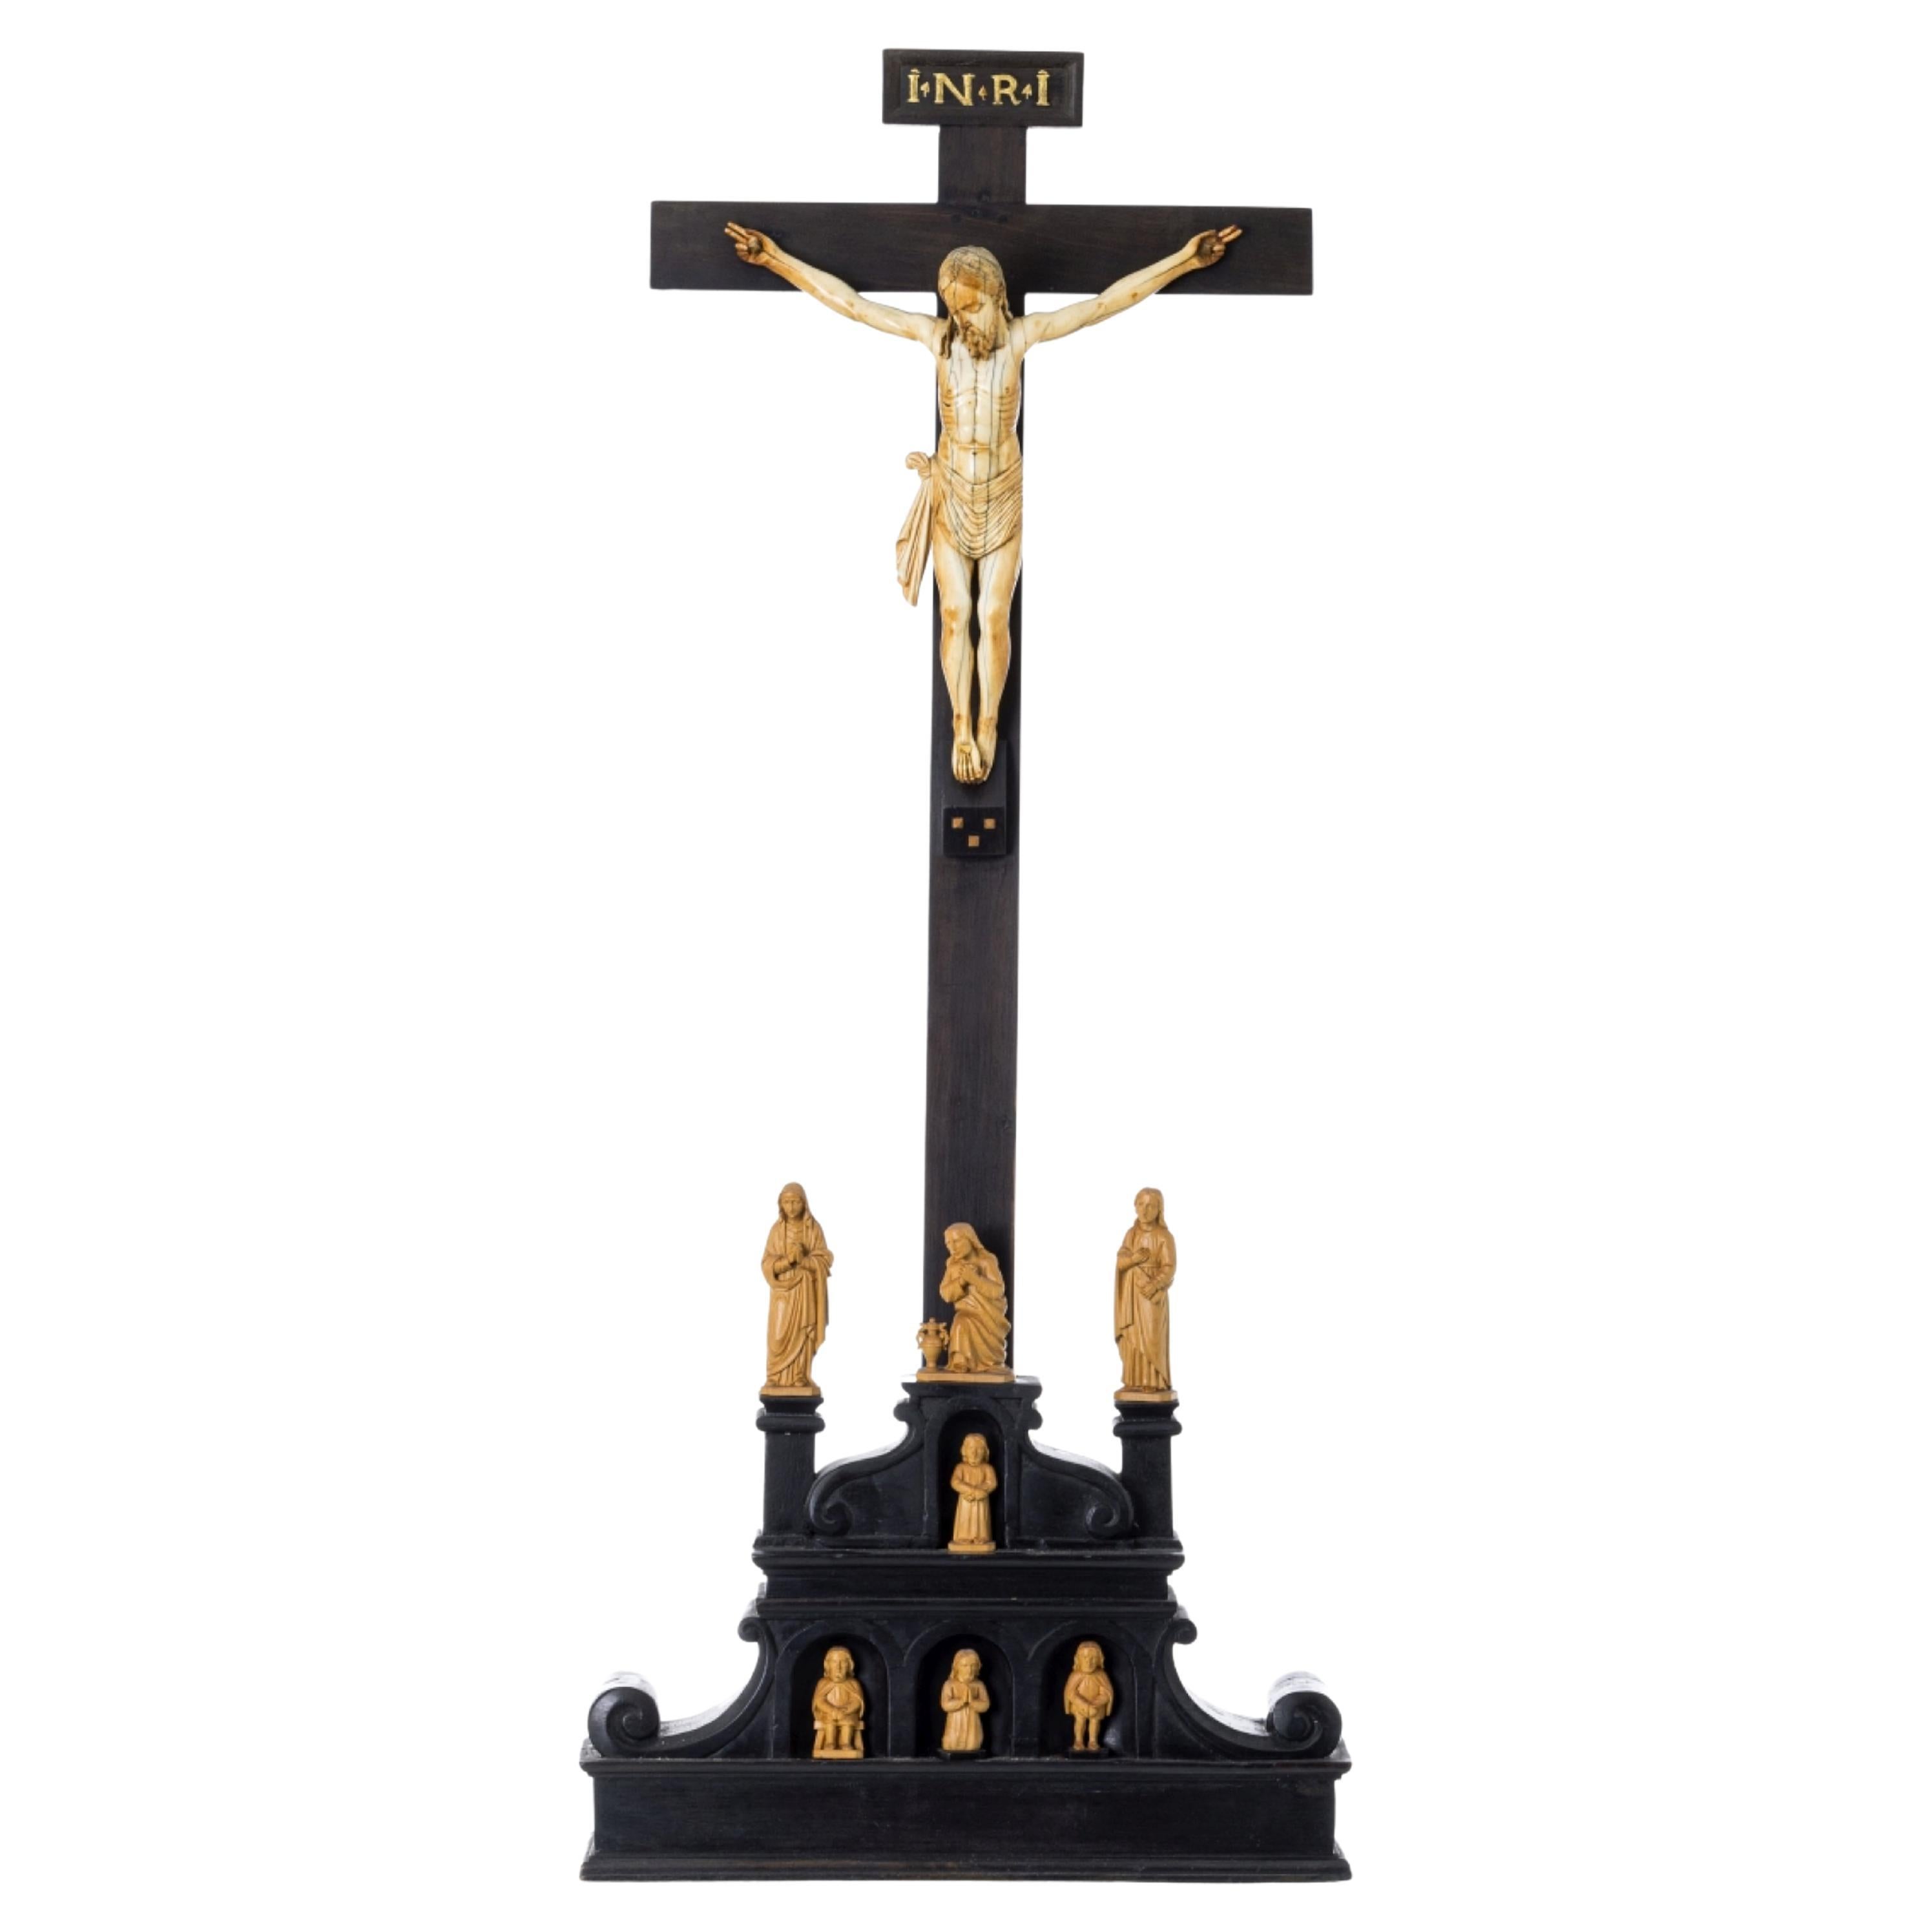 JESUS CHRIST CRUCIFIED  Indo-Portuguese Sculpture from the 17th Century